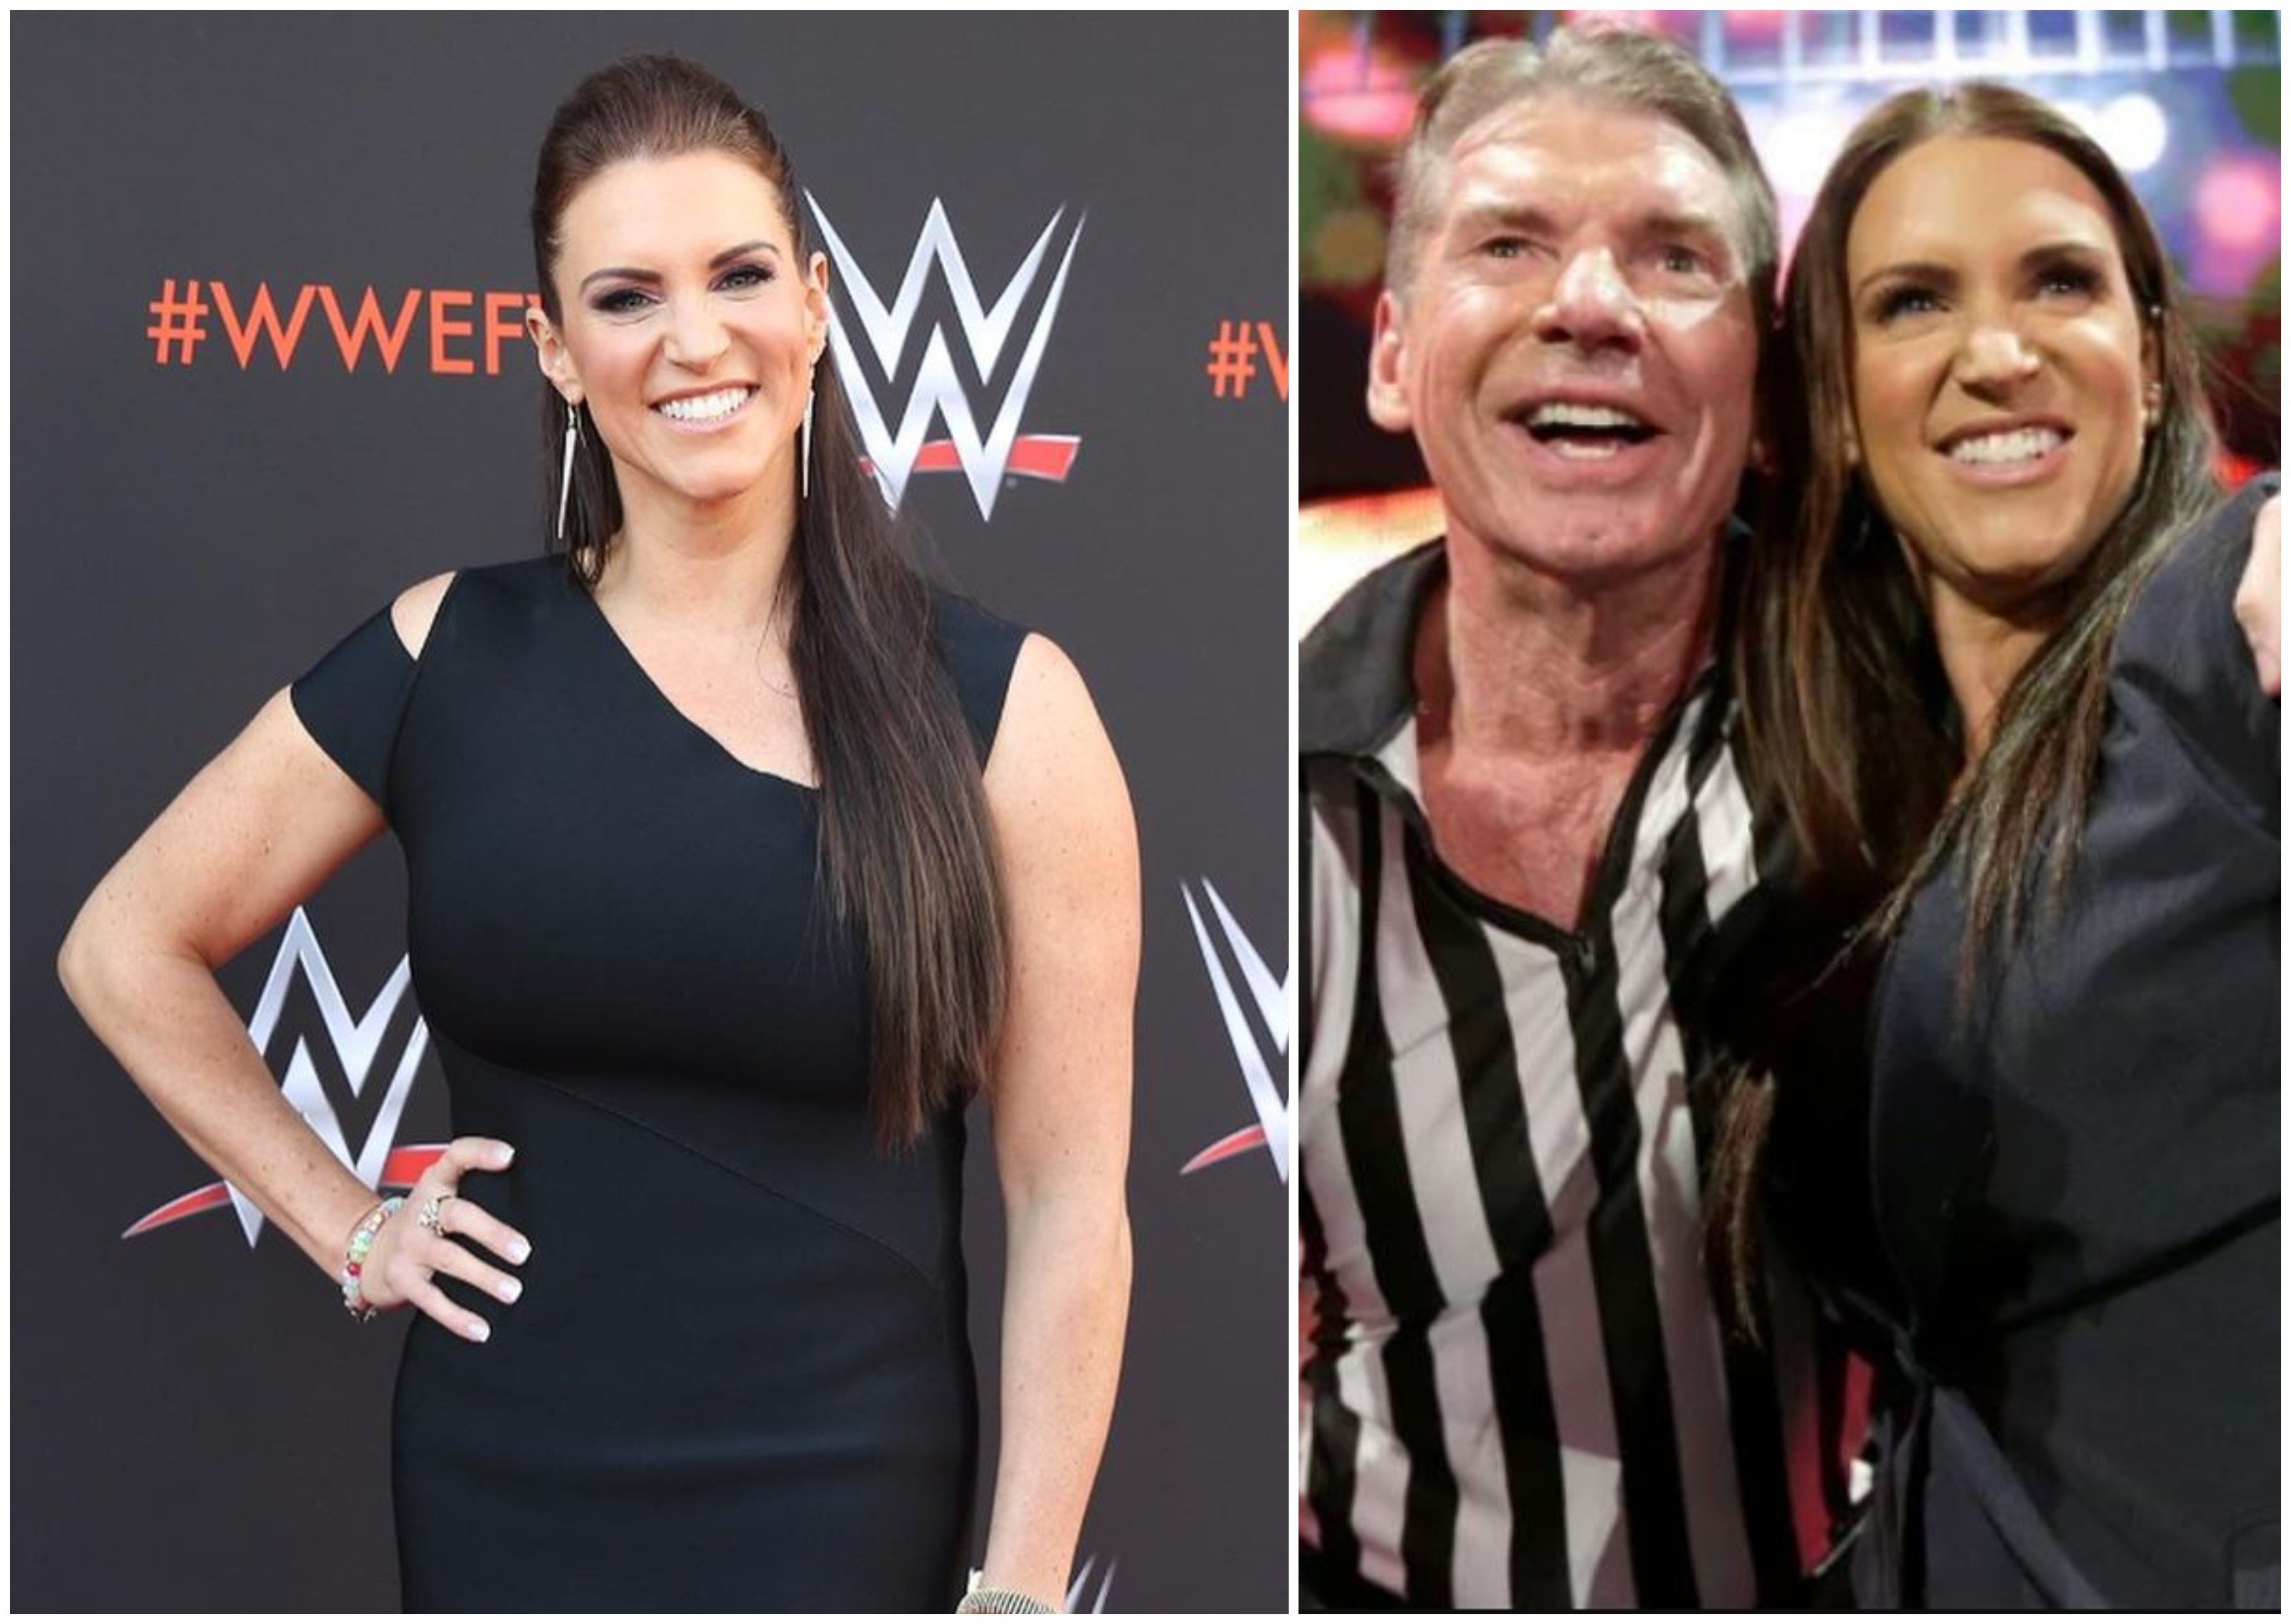 Stephanie McMahon, former wrestler herself, is now CEO of the sports controlling body, WWE, succeeding her father, Vince McMahon. Photos: @stephaniemcmahon/Instagram, Youtube